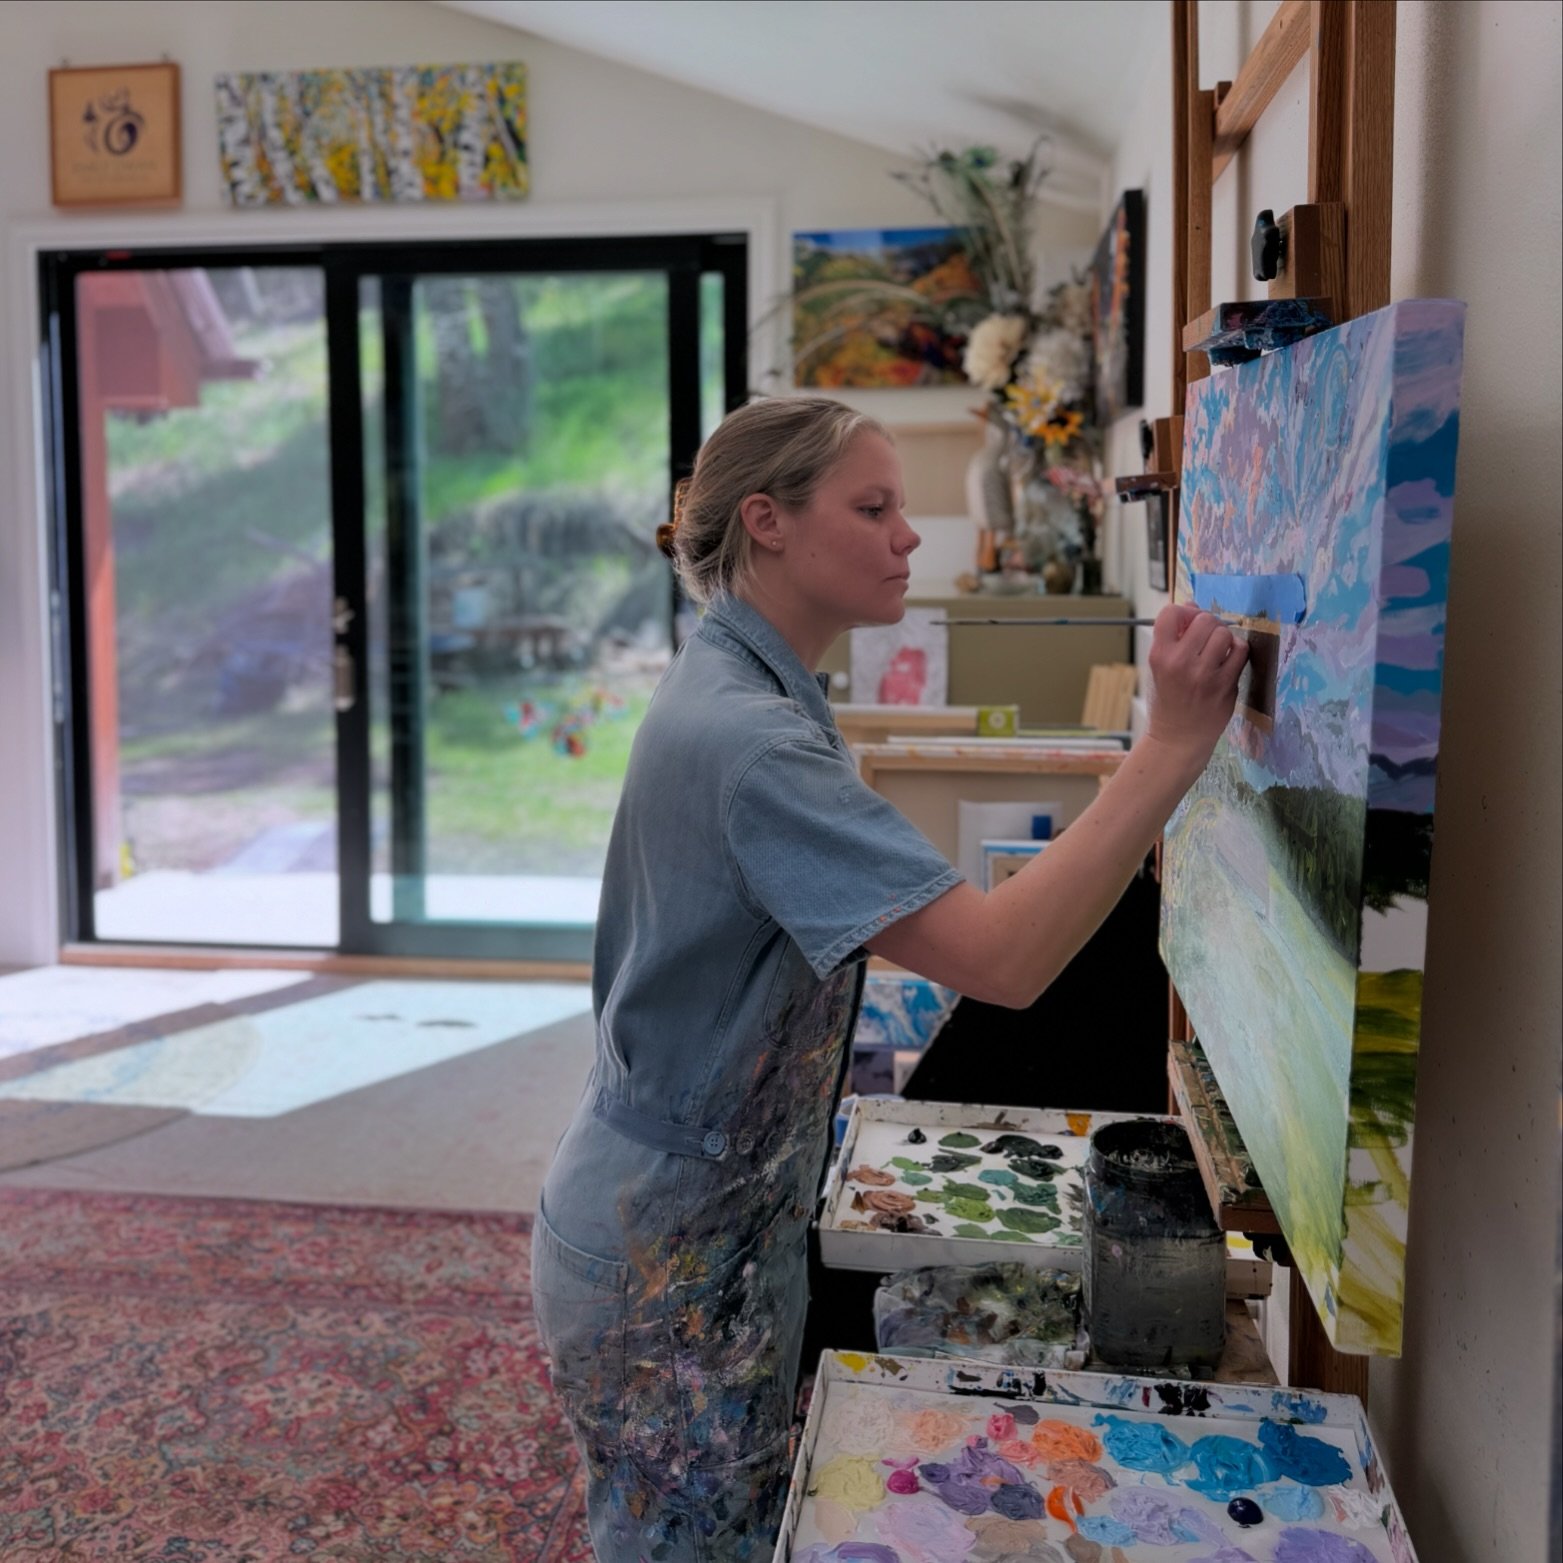 I&rsquo;ve been working on an extra special painting this week that I&rsquo;m super excited about. I look forward to sharing the final piece and more details with you soon! 

It&rsquo;s a peaceful day here in the studio painting while it drizzles out